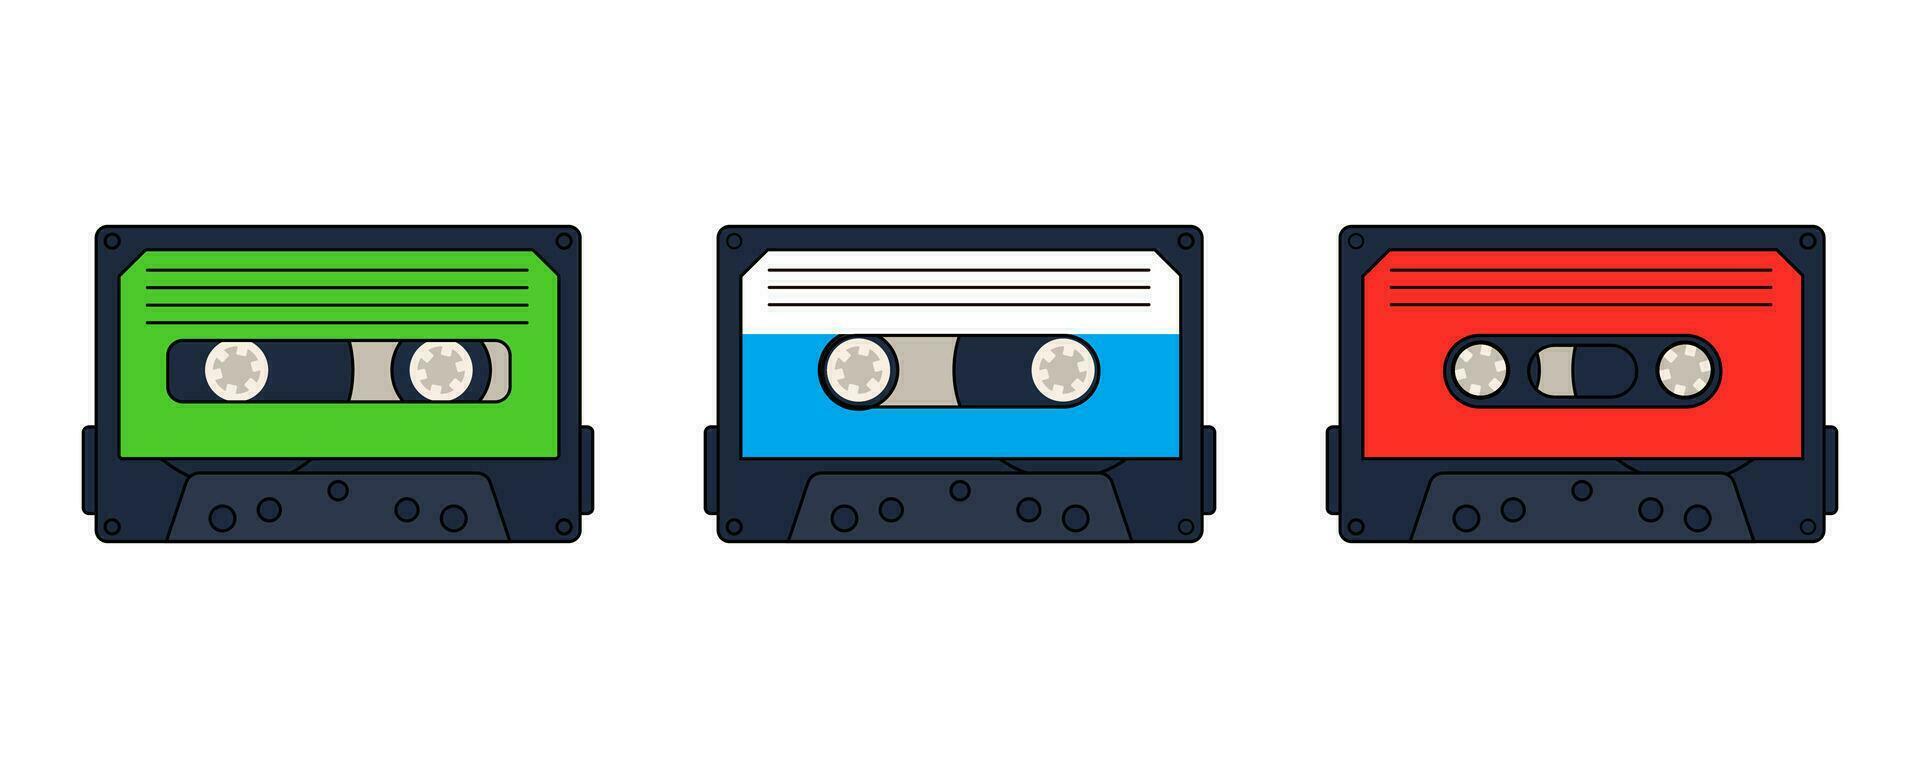 A set of retro cassettes for a tape recorder in Retrowave style. Nastolgia 2000s vector illustration